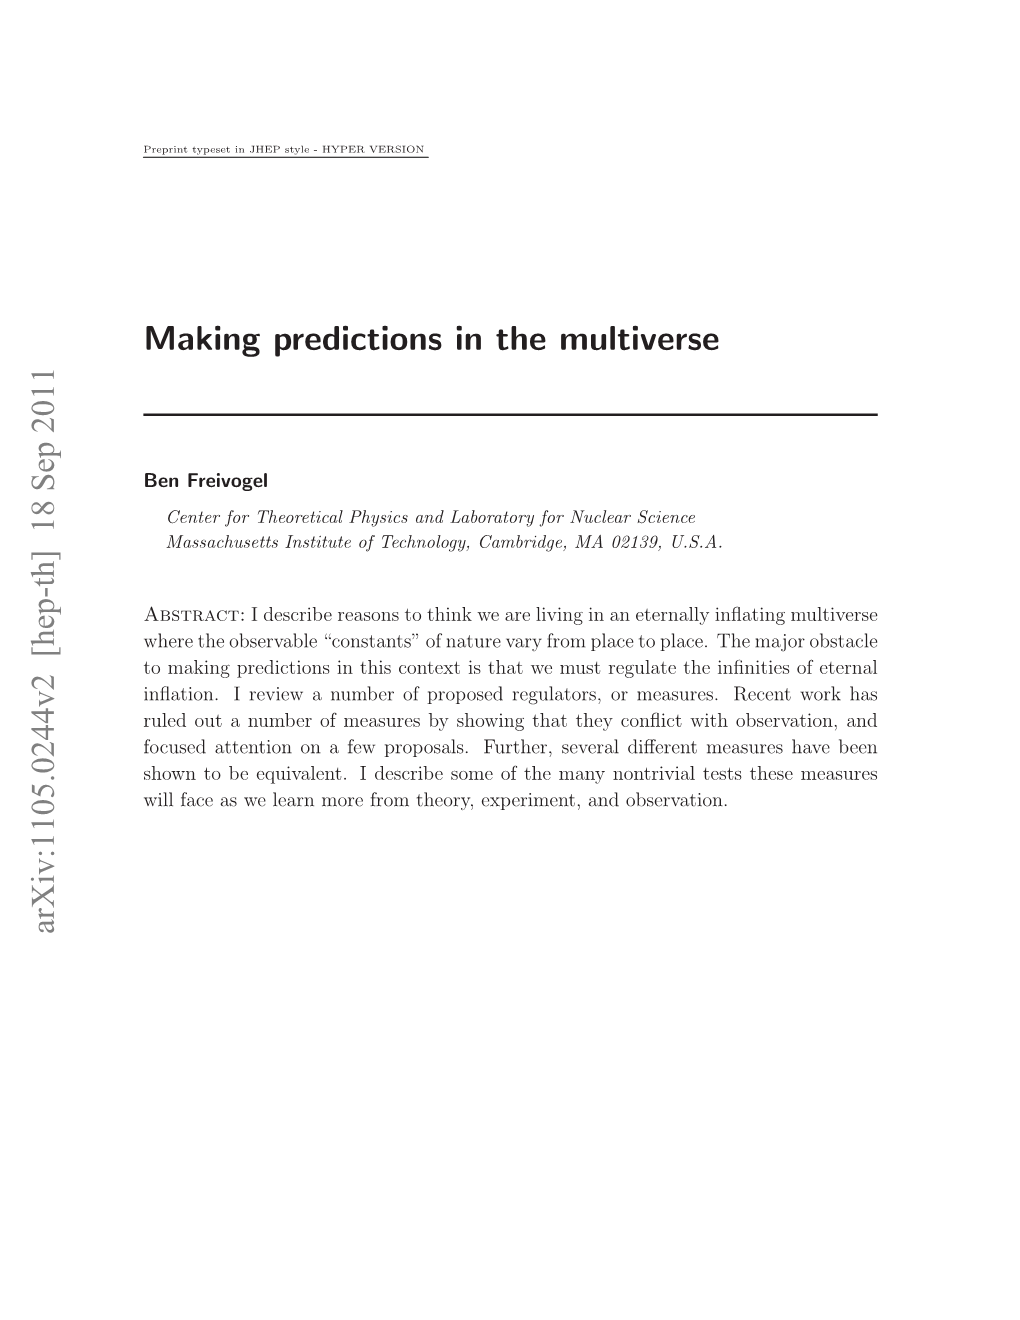 Making Predictions in the Multiverse Arxiv:1105.0244V2 [Hep-Th]